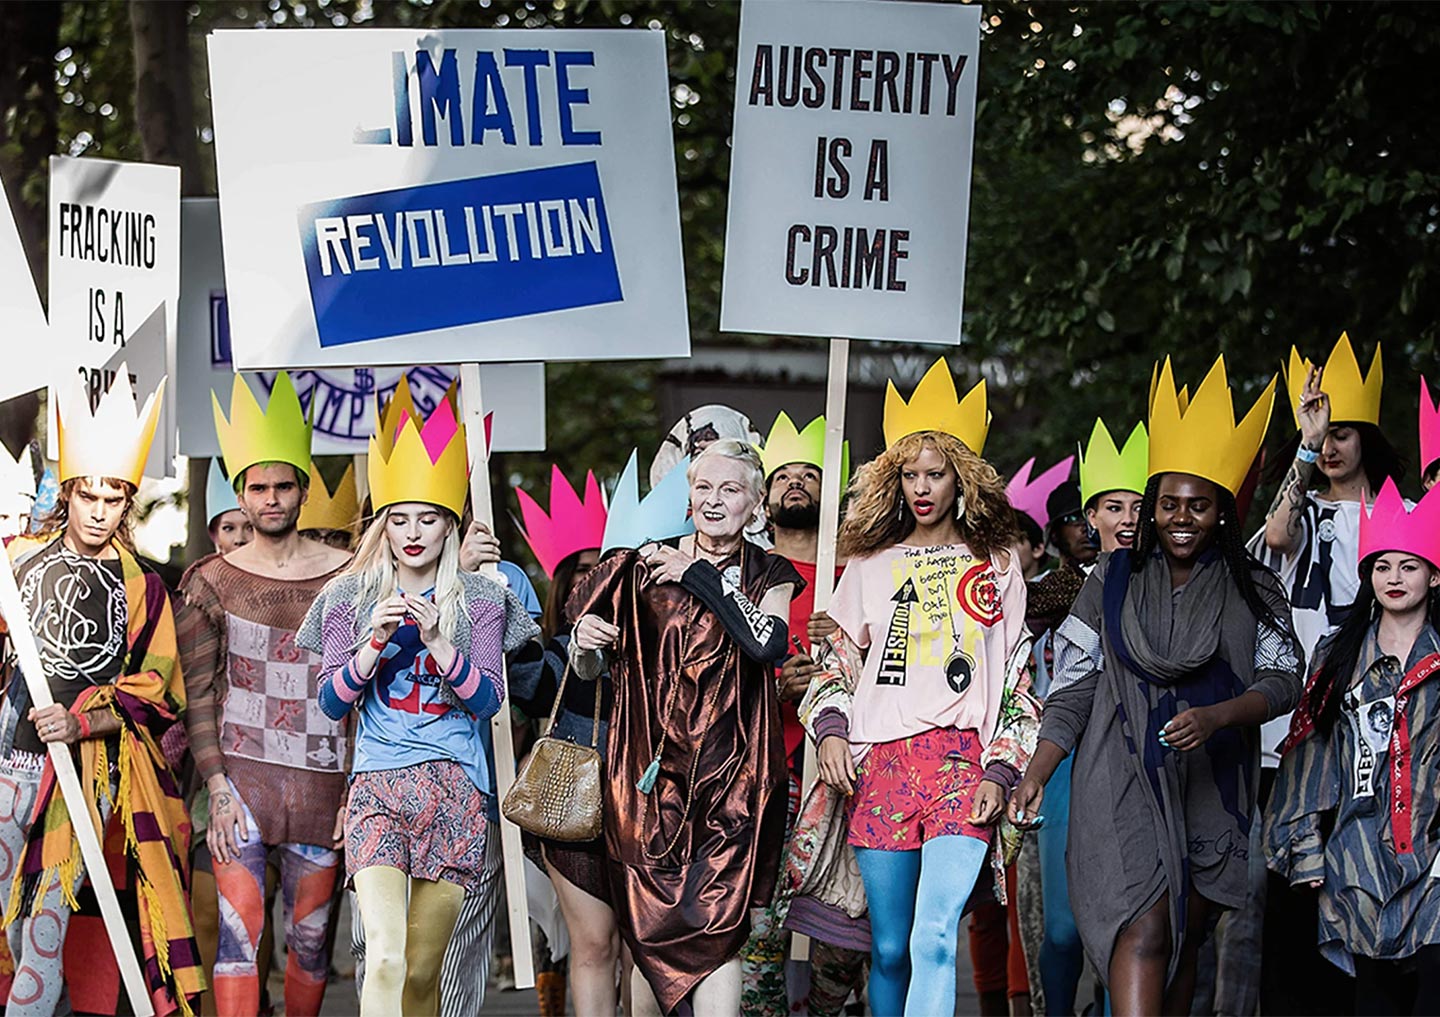 Vivienne Westwood organised several demonstrations to highlight her concerns about climate change and mass production